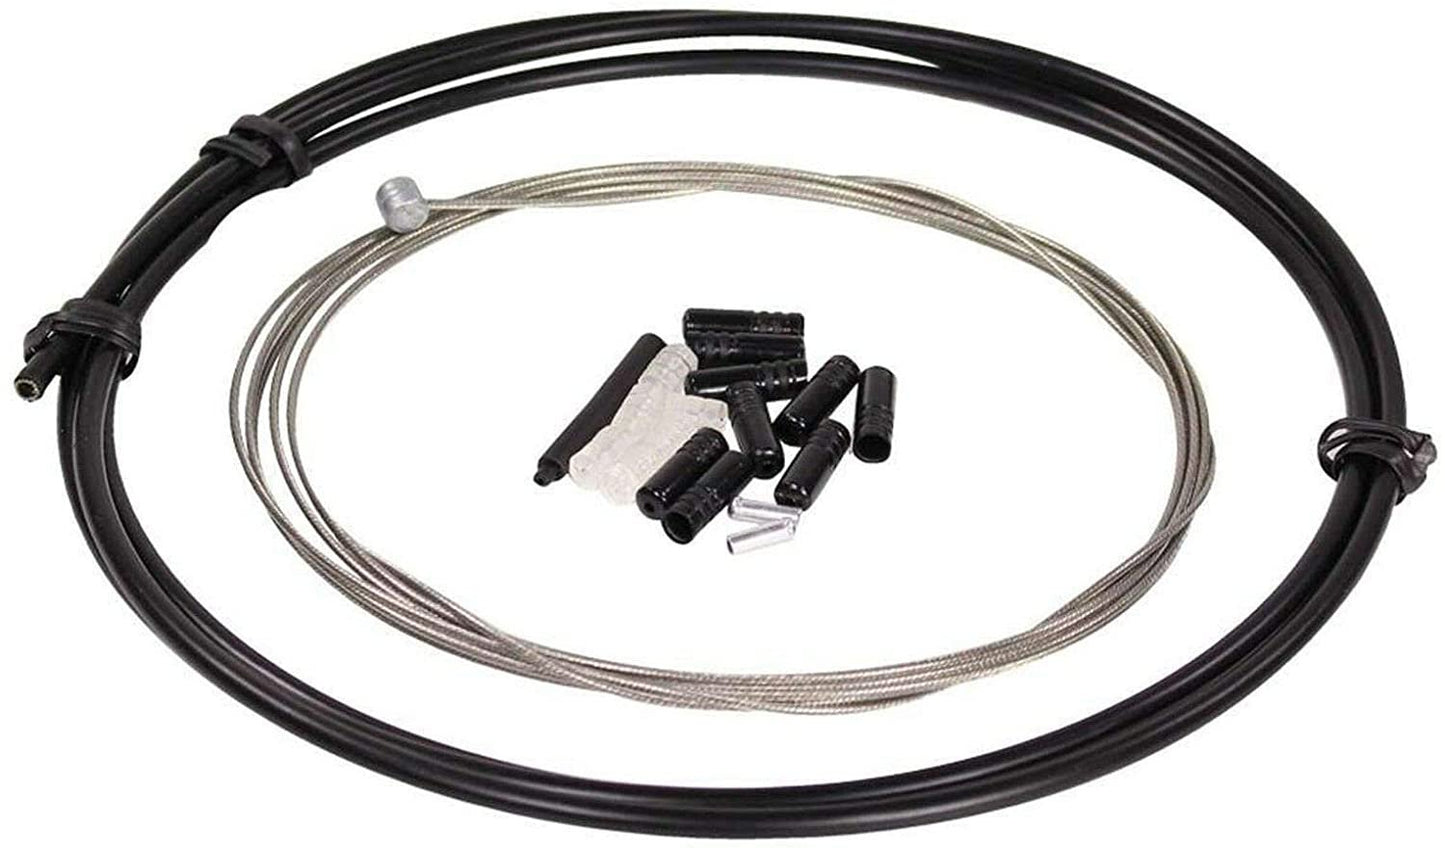 Serfas Stainless Steel Road Bicycle Brake Cable Kit - BCKIT-RDS